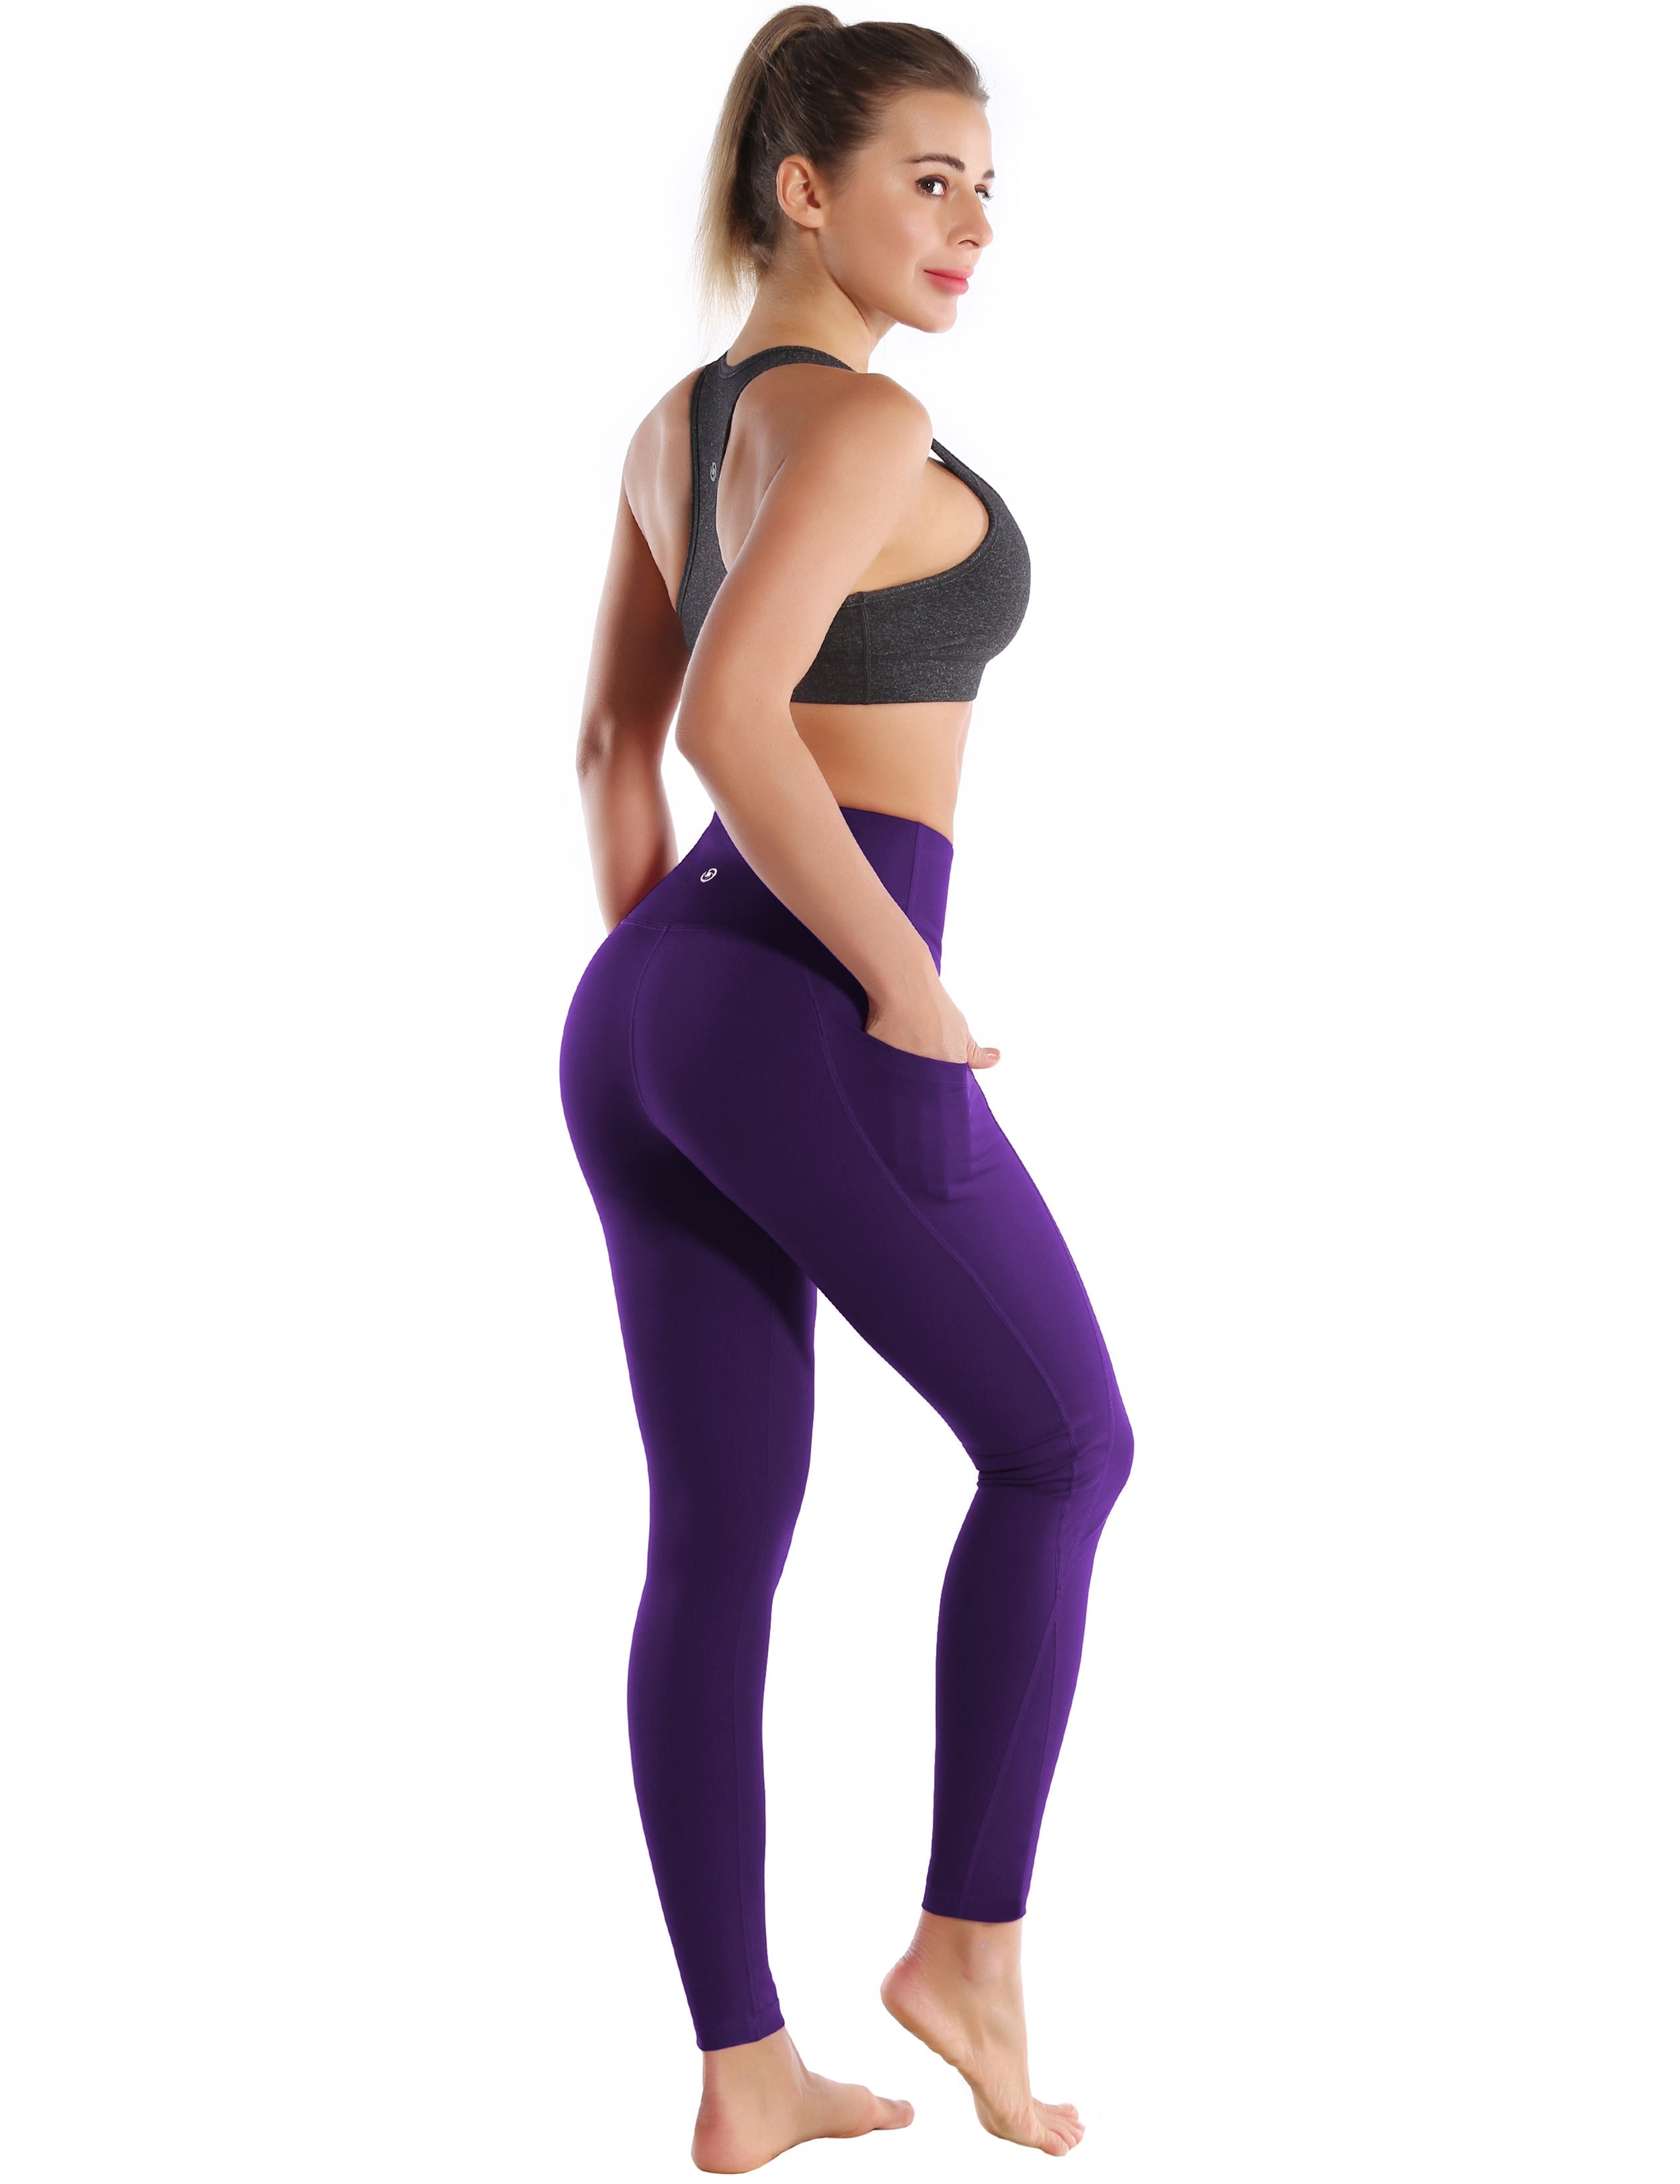 High Waist Side Pockets Tall Size Pants eggplantpurple 75% Nylon, 25% Spandex Fabric doesn't attract lint easily 4-way stretch No see-through Moisture-wicking Tummy control Inner pocket